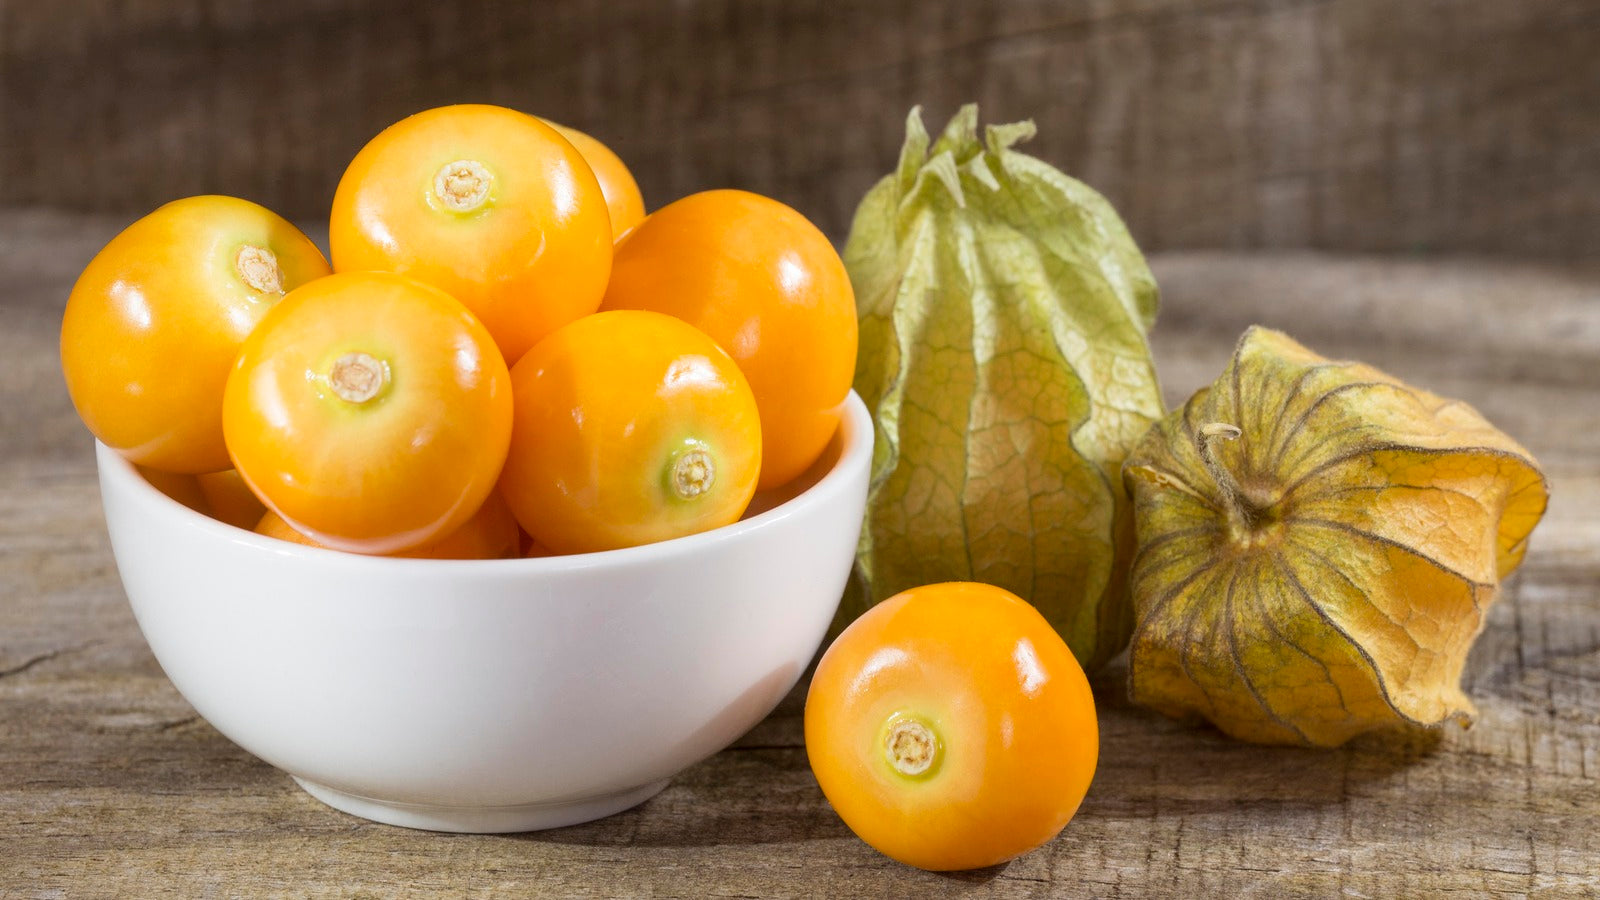 Gooseberries are a delicious treat, that are actually related to tomatillos.